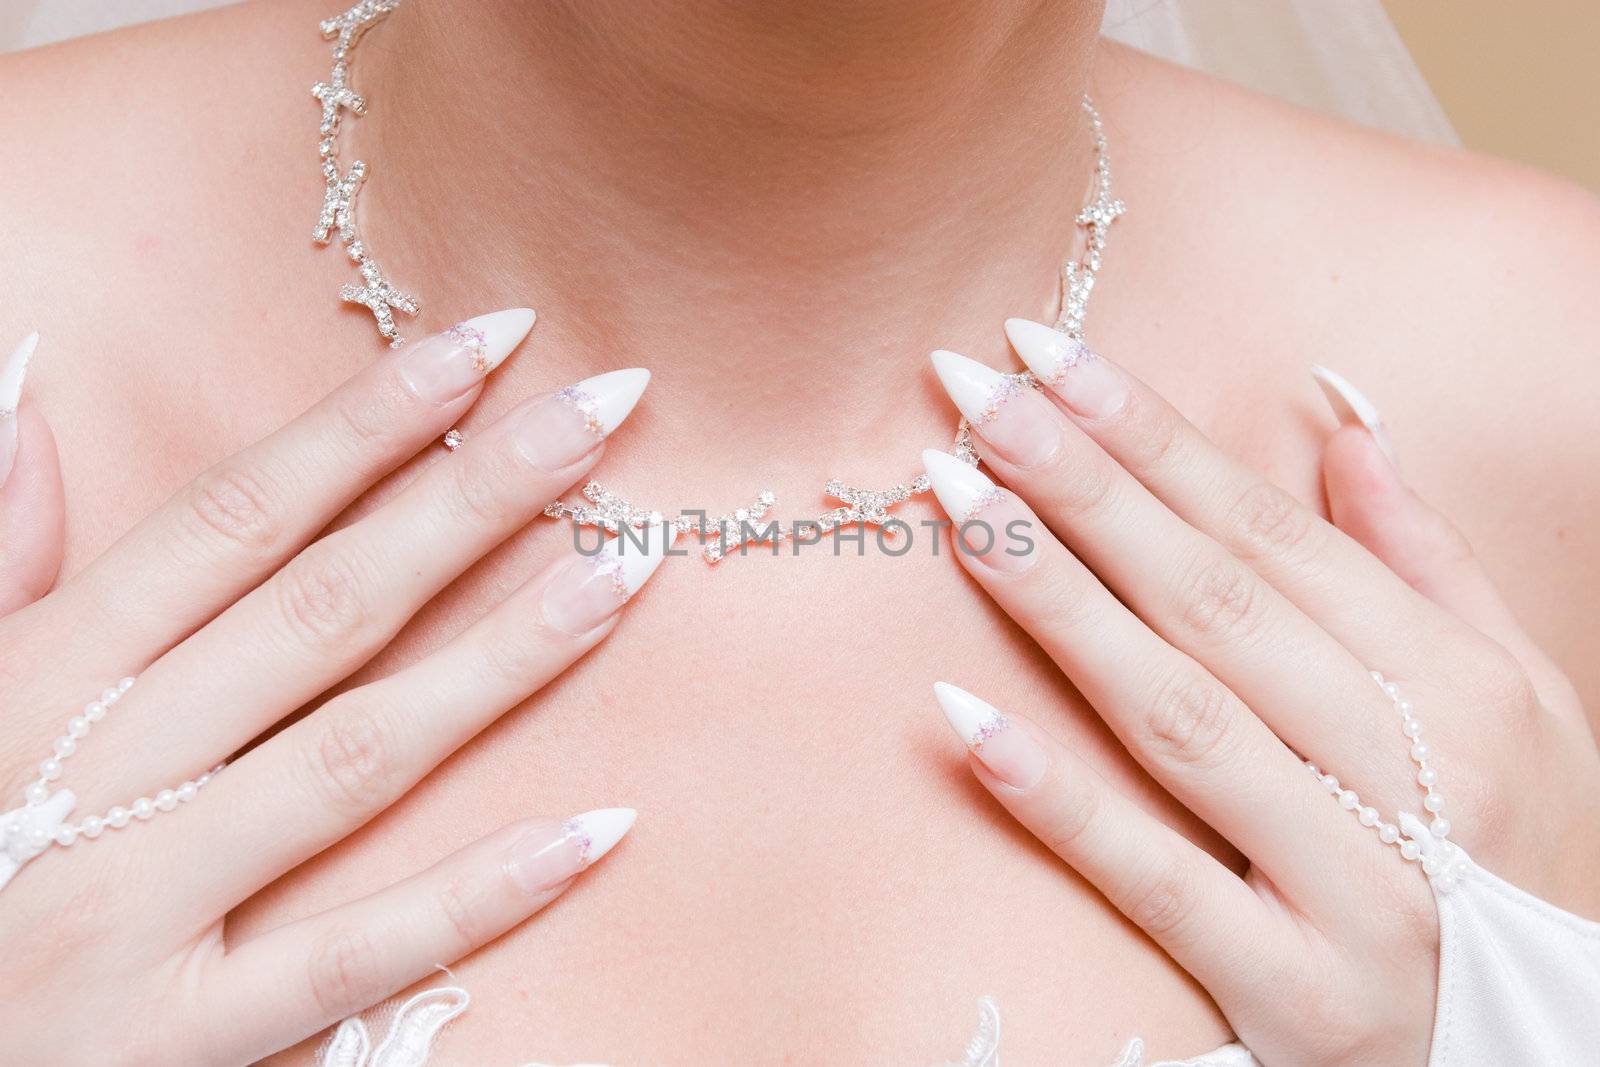 hands of the girl on the necklace